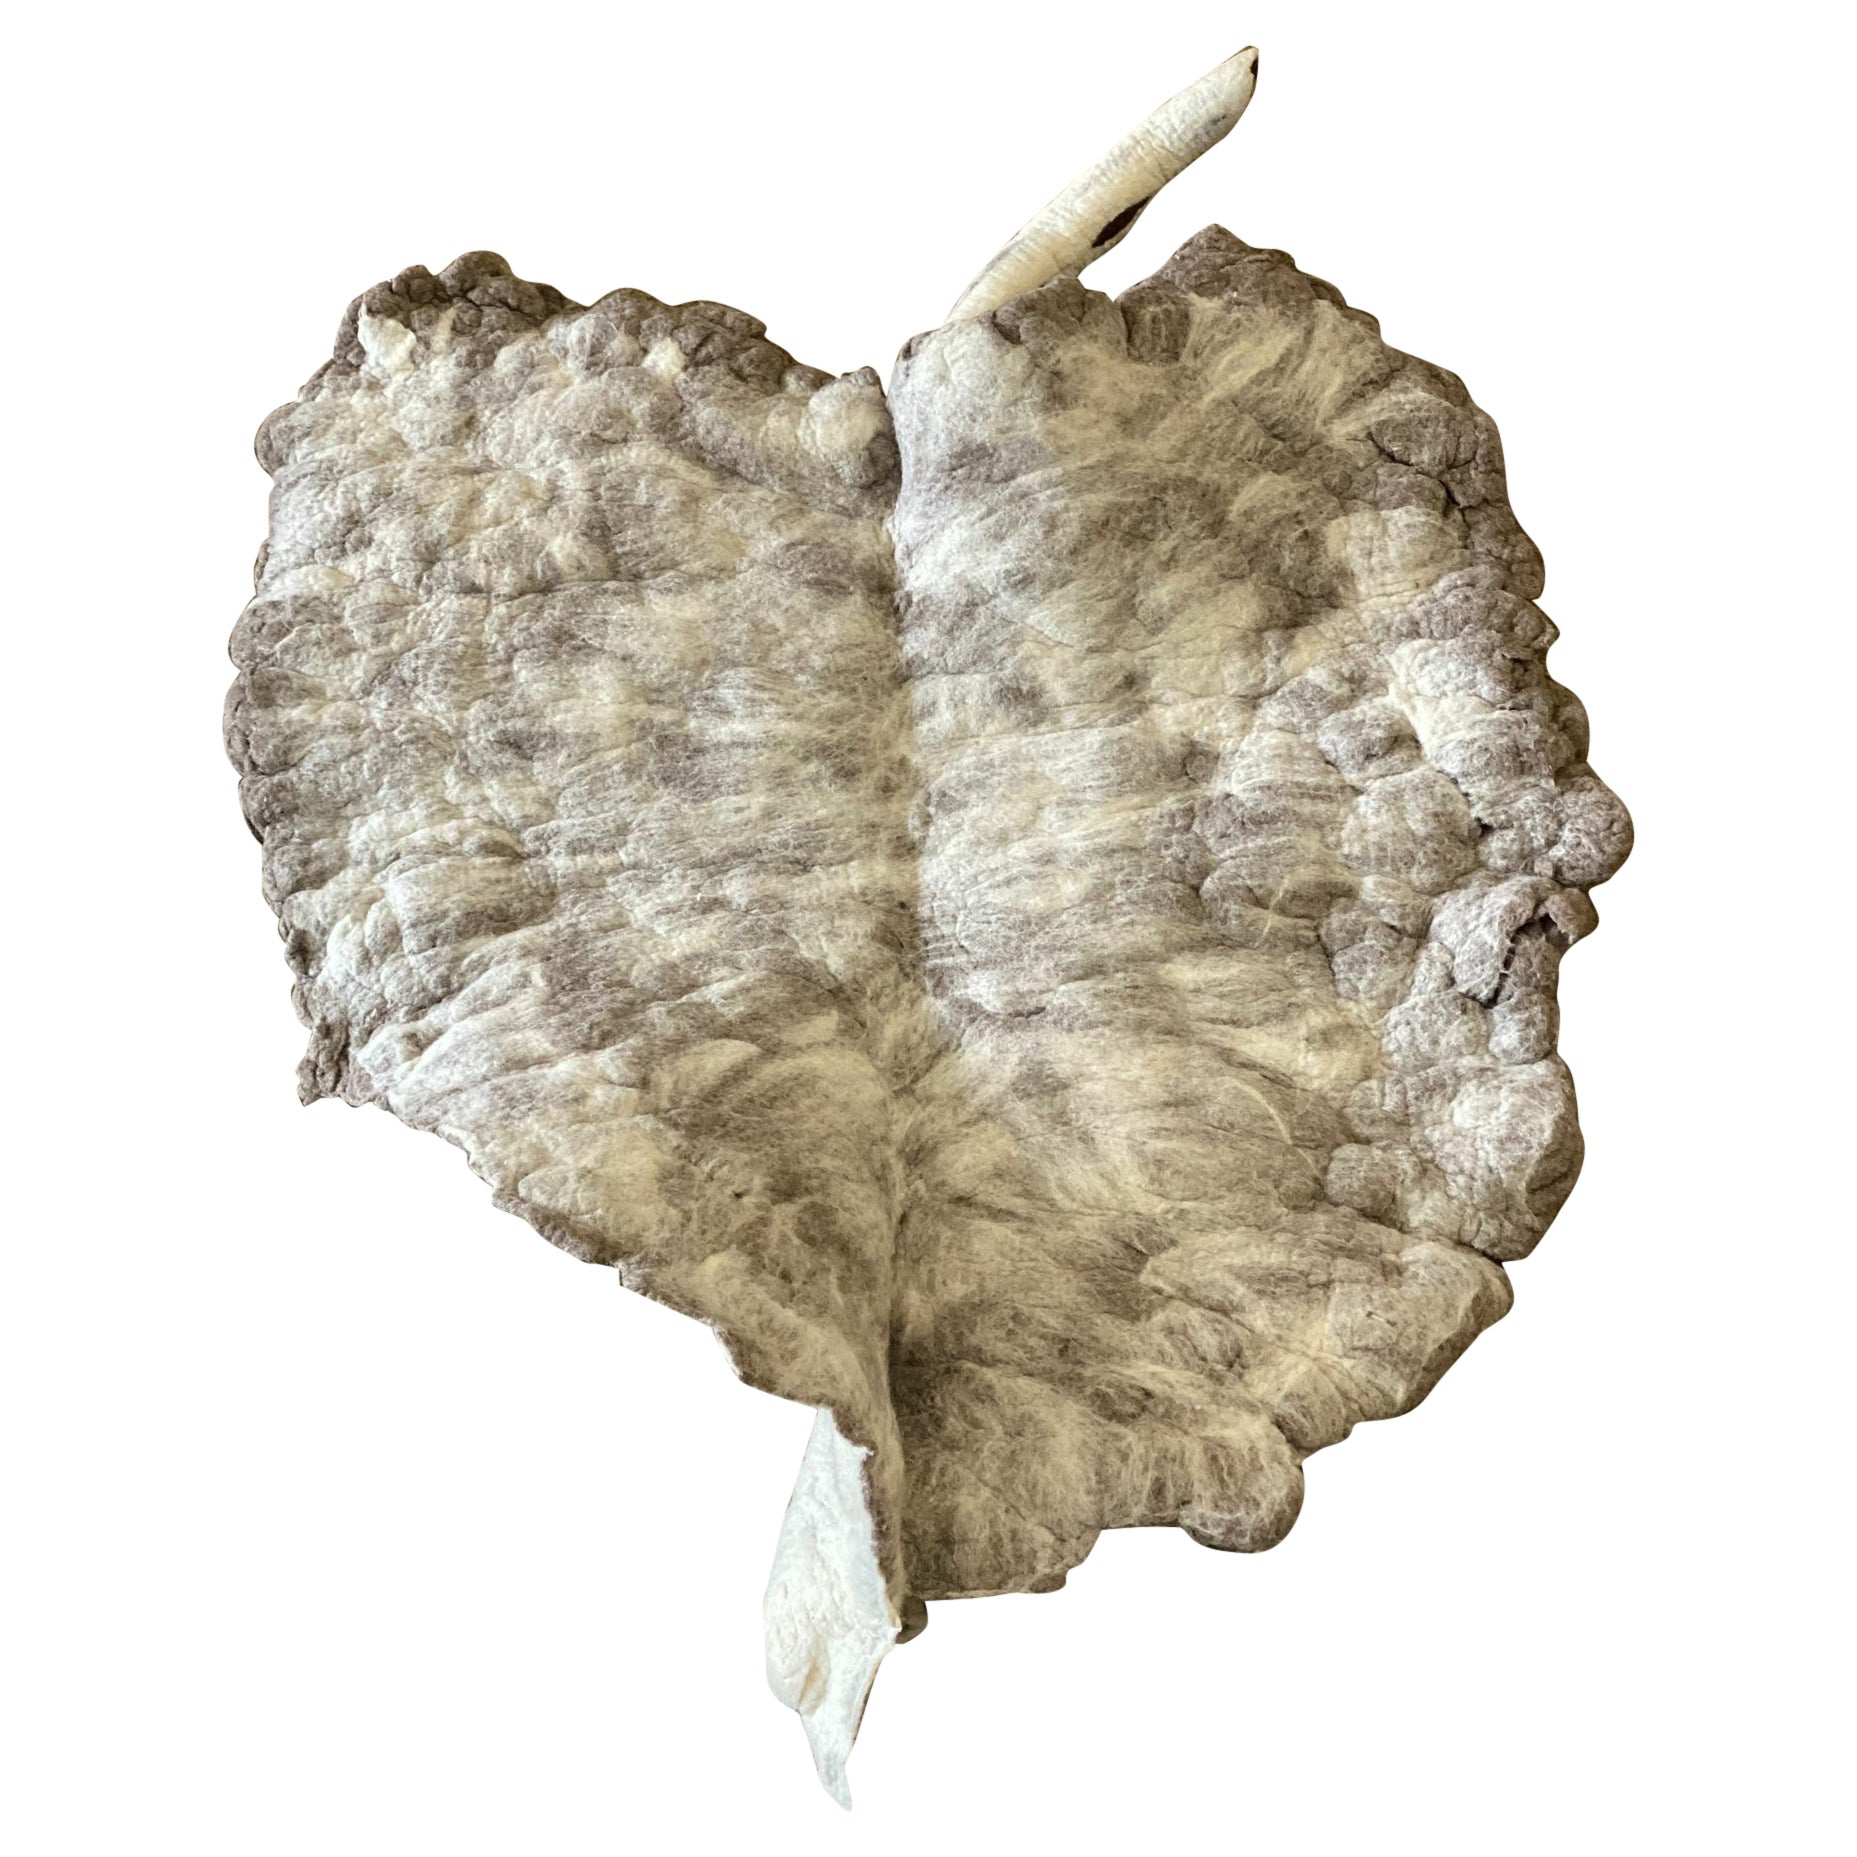 Giant Leaf, Naturally Dyed Felted Wool Sculpture by Inês Schertel, Brazil, 2019